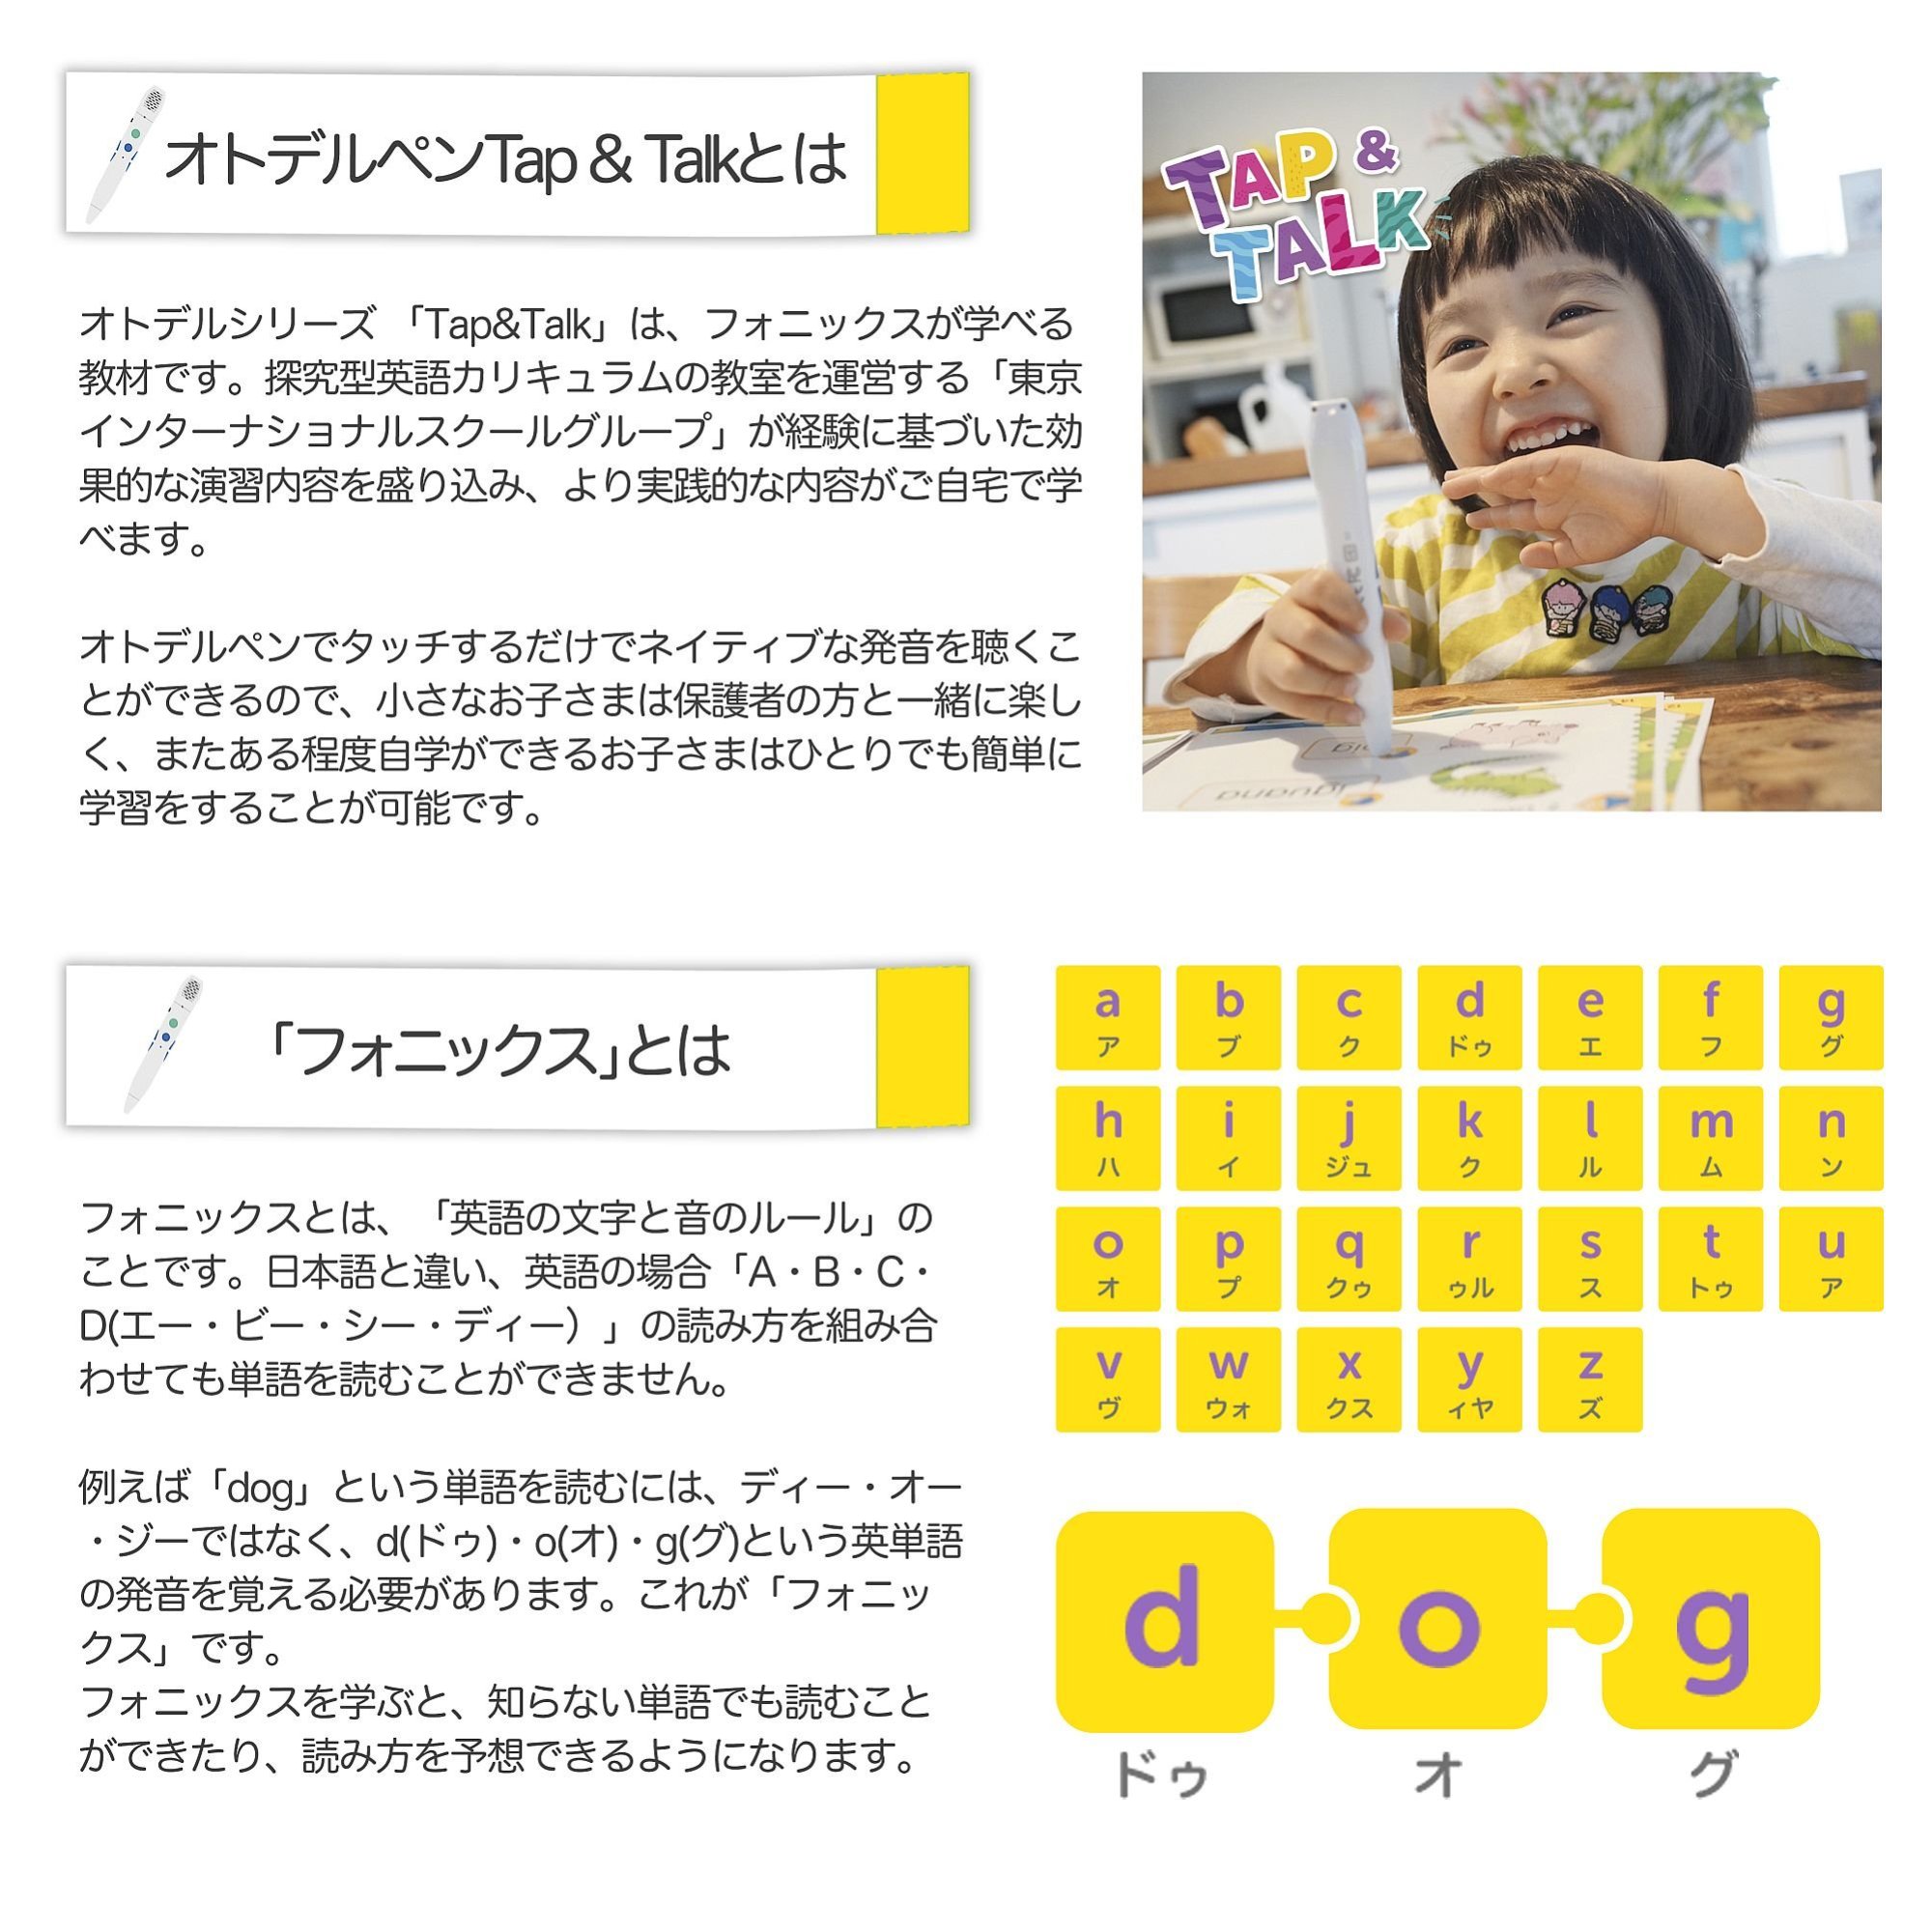 oto Dell pen Tap&amp;Talk1*2*3 set g lid Mark tap &amp;to-k for children with voice .neitib English study picture book 